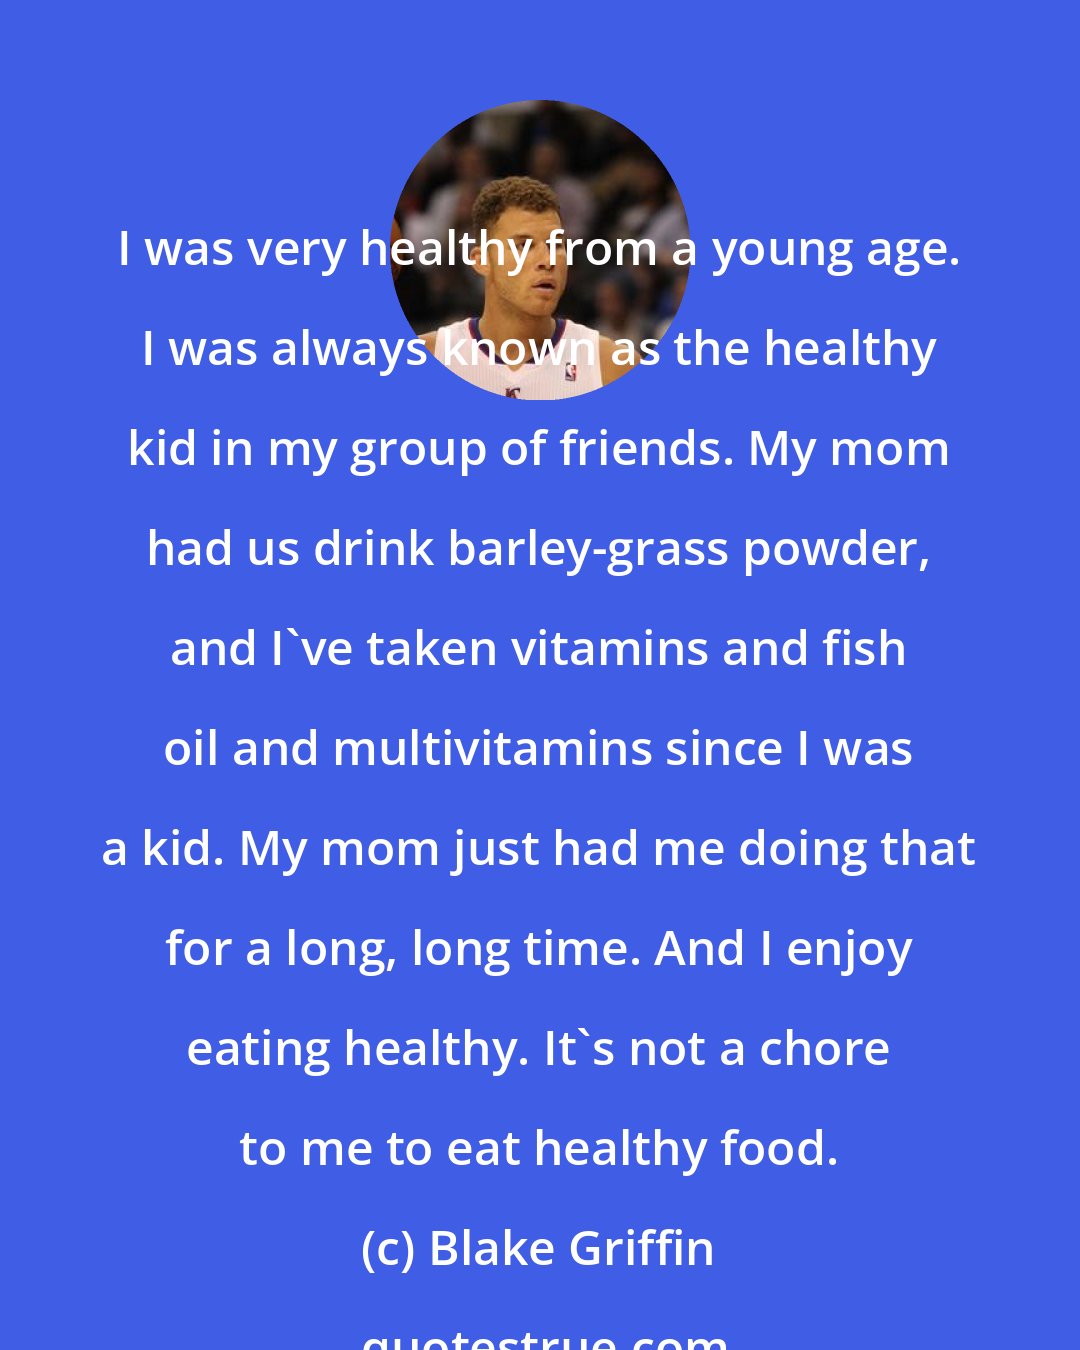 Blake Griffin: I was very healthy from a young age. I was always known as the healthy kid in my group of friends. My mom had us drink barley-grass powder, and I've taken vitamins and fish oil and multivitamins since I was a kid. My mom just had me doing that for a long, long time. And I enjoy eating healthy. It's not a chore to me to eat healthy food.